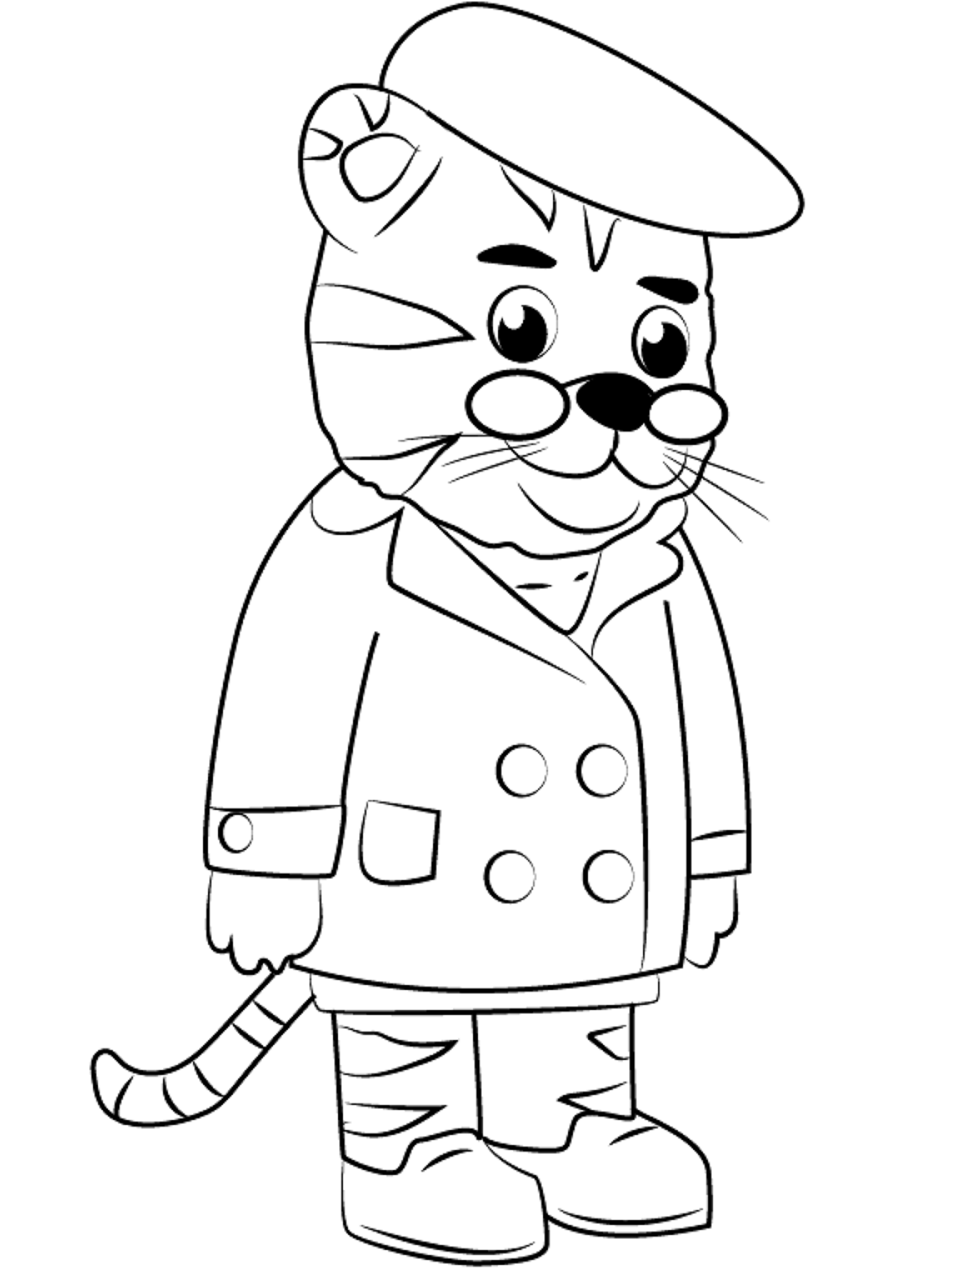 Grandpere Tiger Coloring Pages